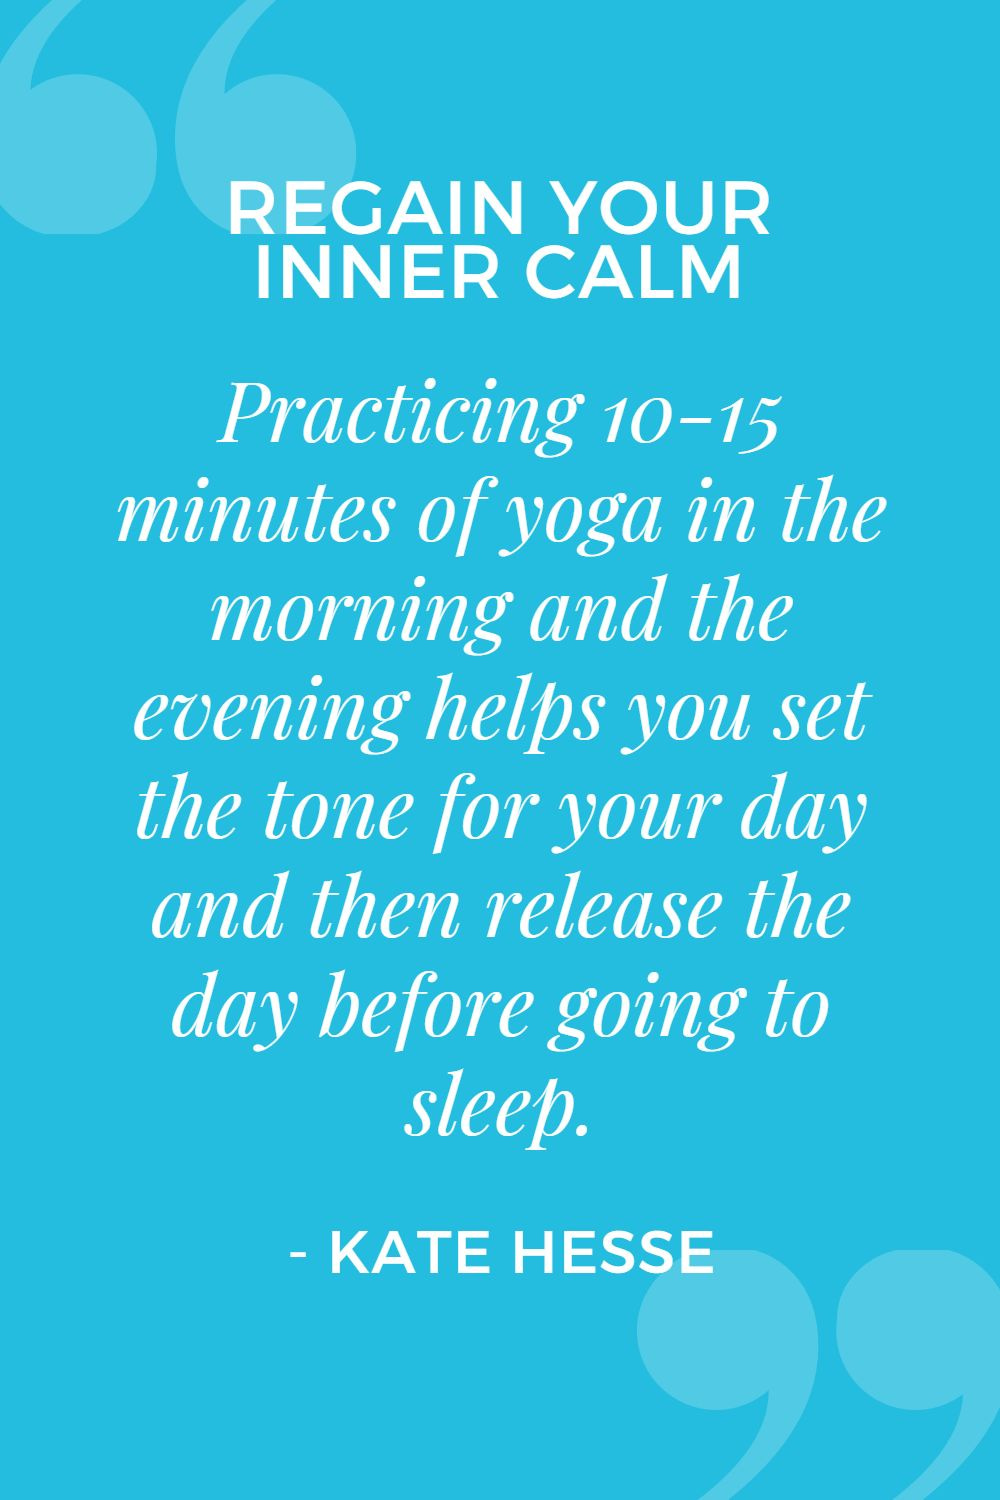 Practicing 10-15 minutes of yoga in the morning and the evening helps you set the tone for your day and then release the day before going to sleep.